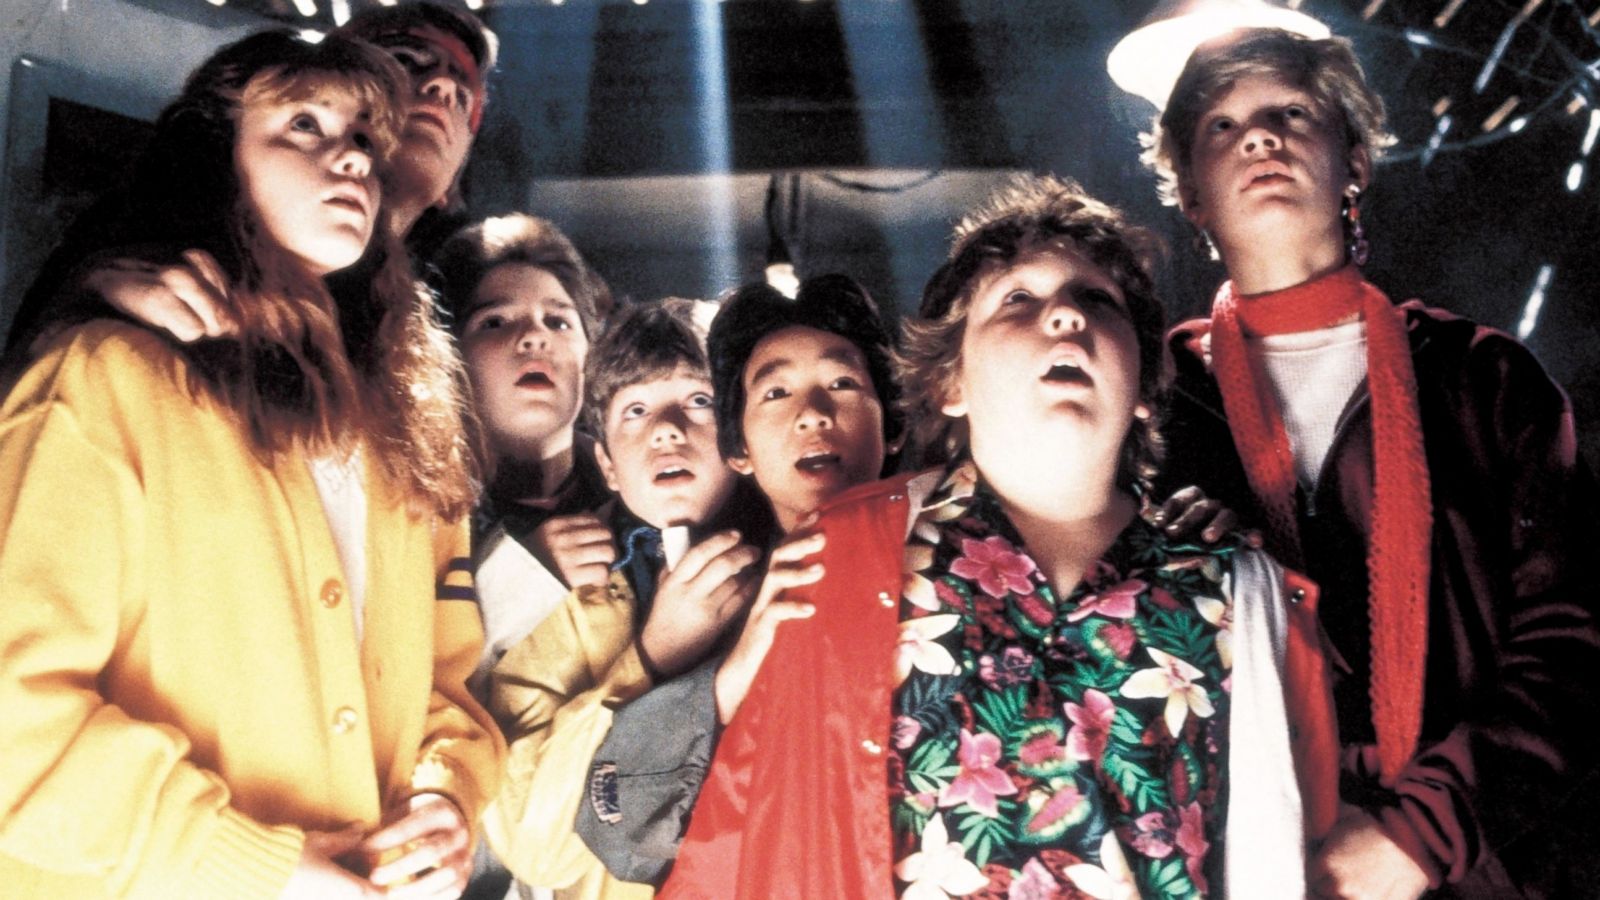 The Goonies' Turns 30: Where Are They Now? - ABC News